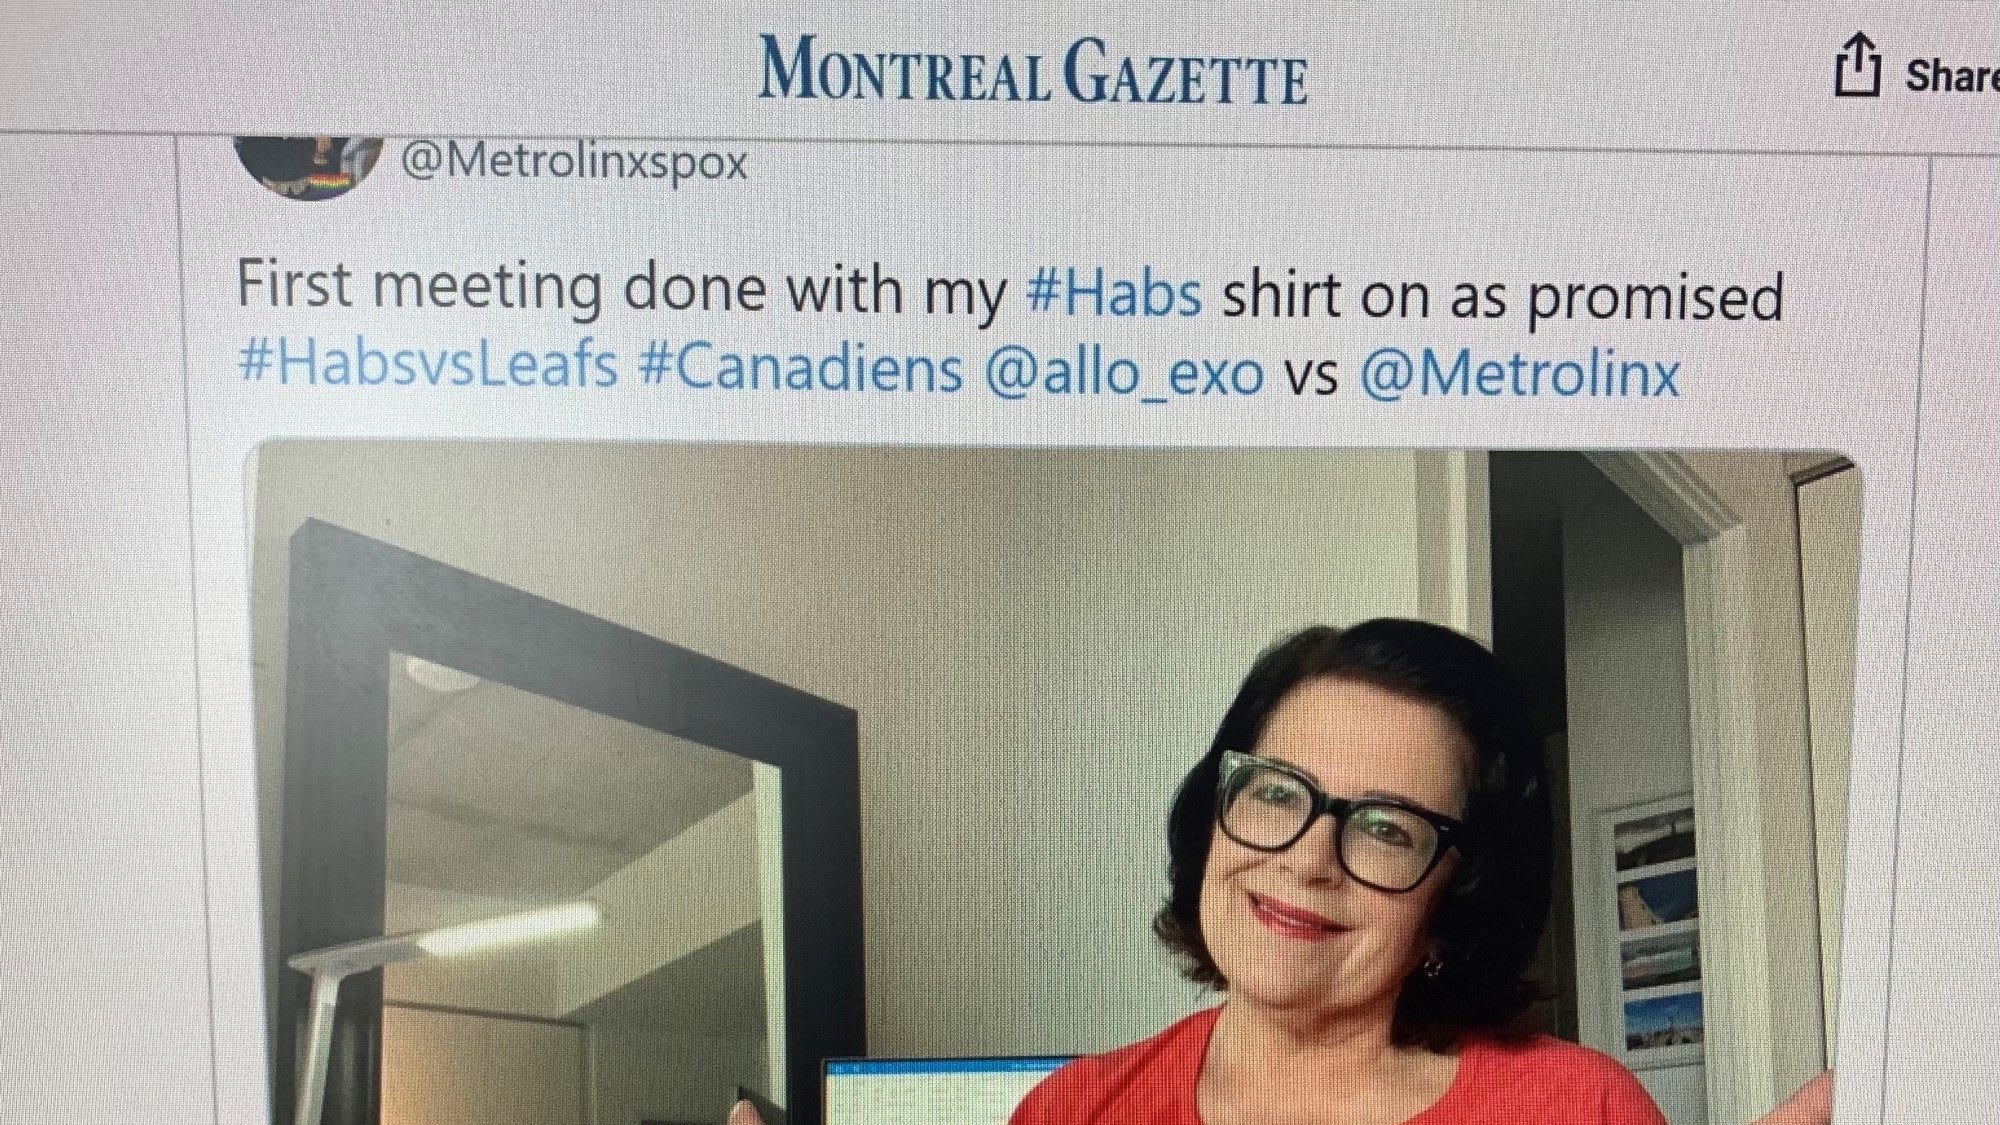 Anne Marie shows her Montreal Canadians shirt on the Montreal Gazette site.